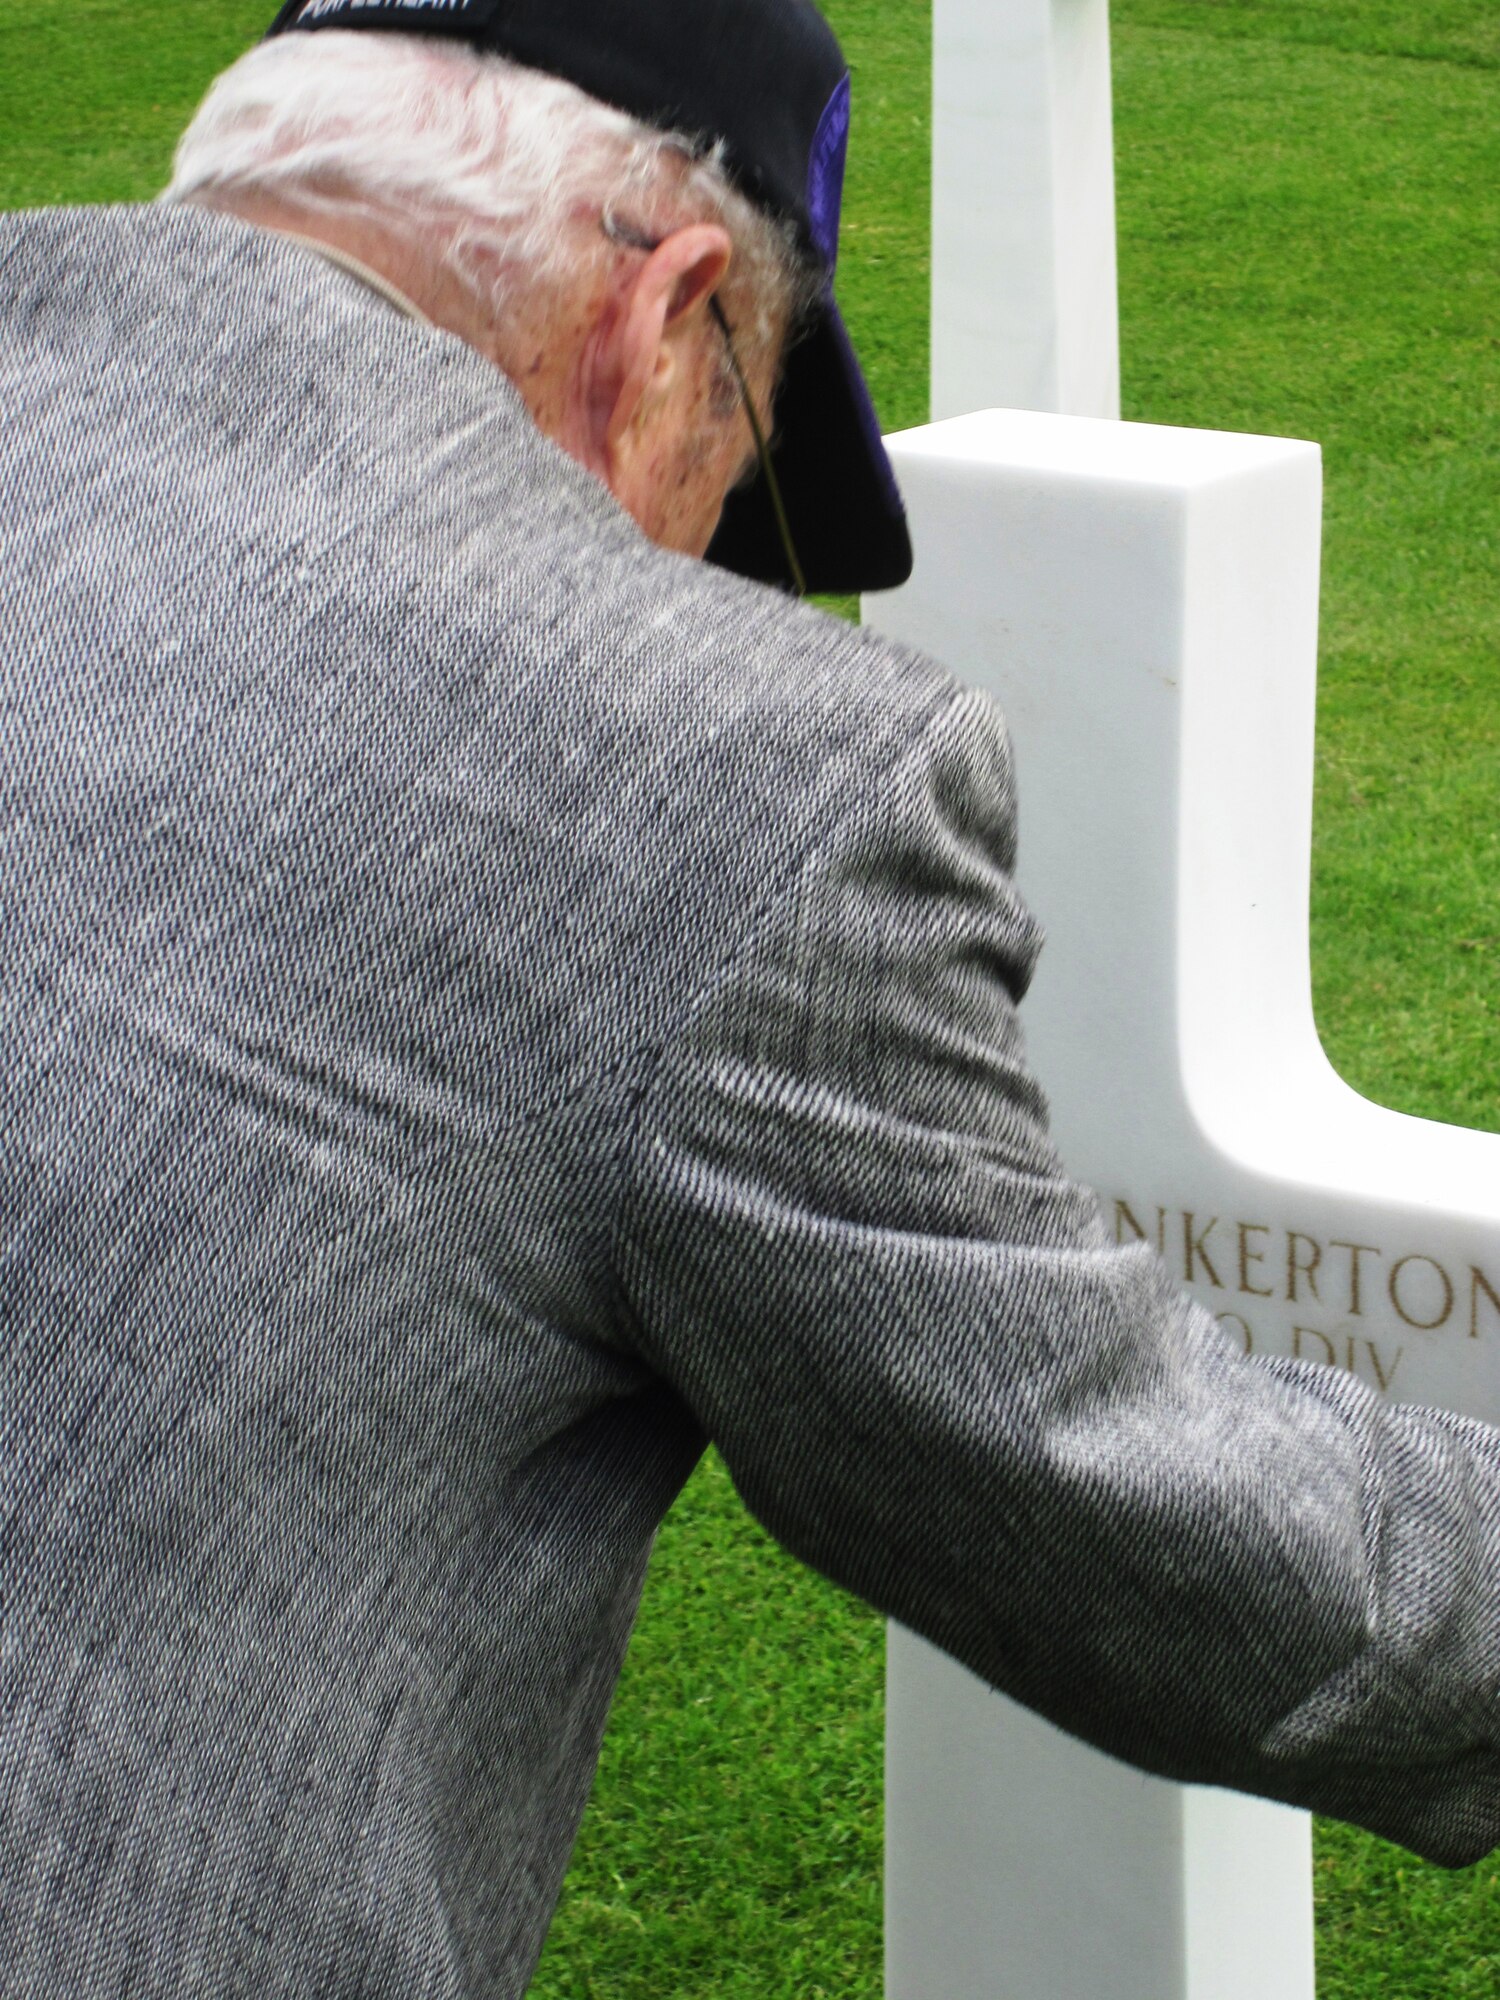 CAMBRIDGE AMERICAN CEMETERY, England - James Pinkerton, 87-year-old Purple Heart veteran of World War II, visits his brother’s grave at Cambridge American Cemetery, May 19, 2011. Pinkerton had not seen his brother in more than 50 years, since the two joined the Army during WWII and Pinkerton deployed to serve in the Pacific. His brother served in Europe and was laid to rest in Cambridge, England. (Courtesy photo)